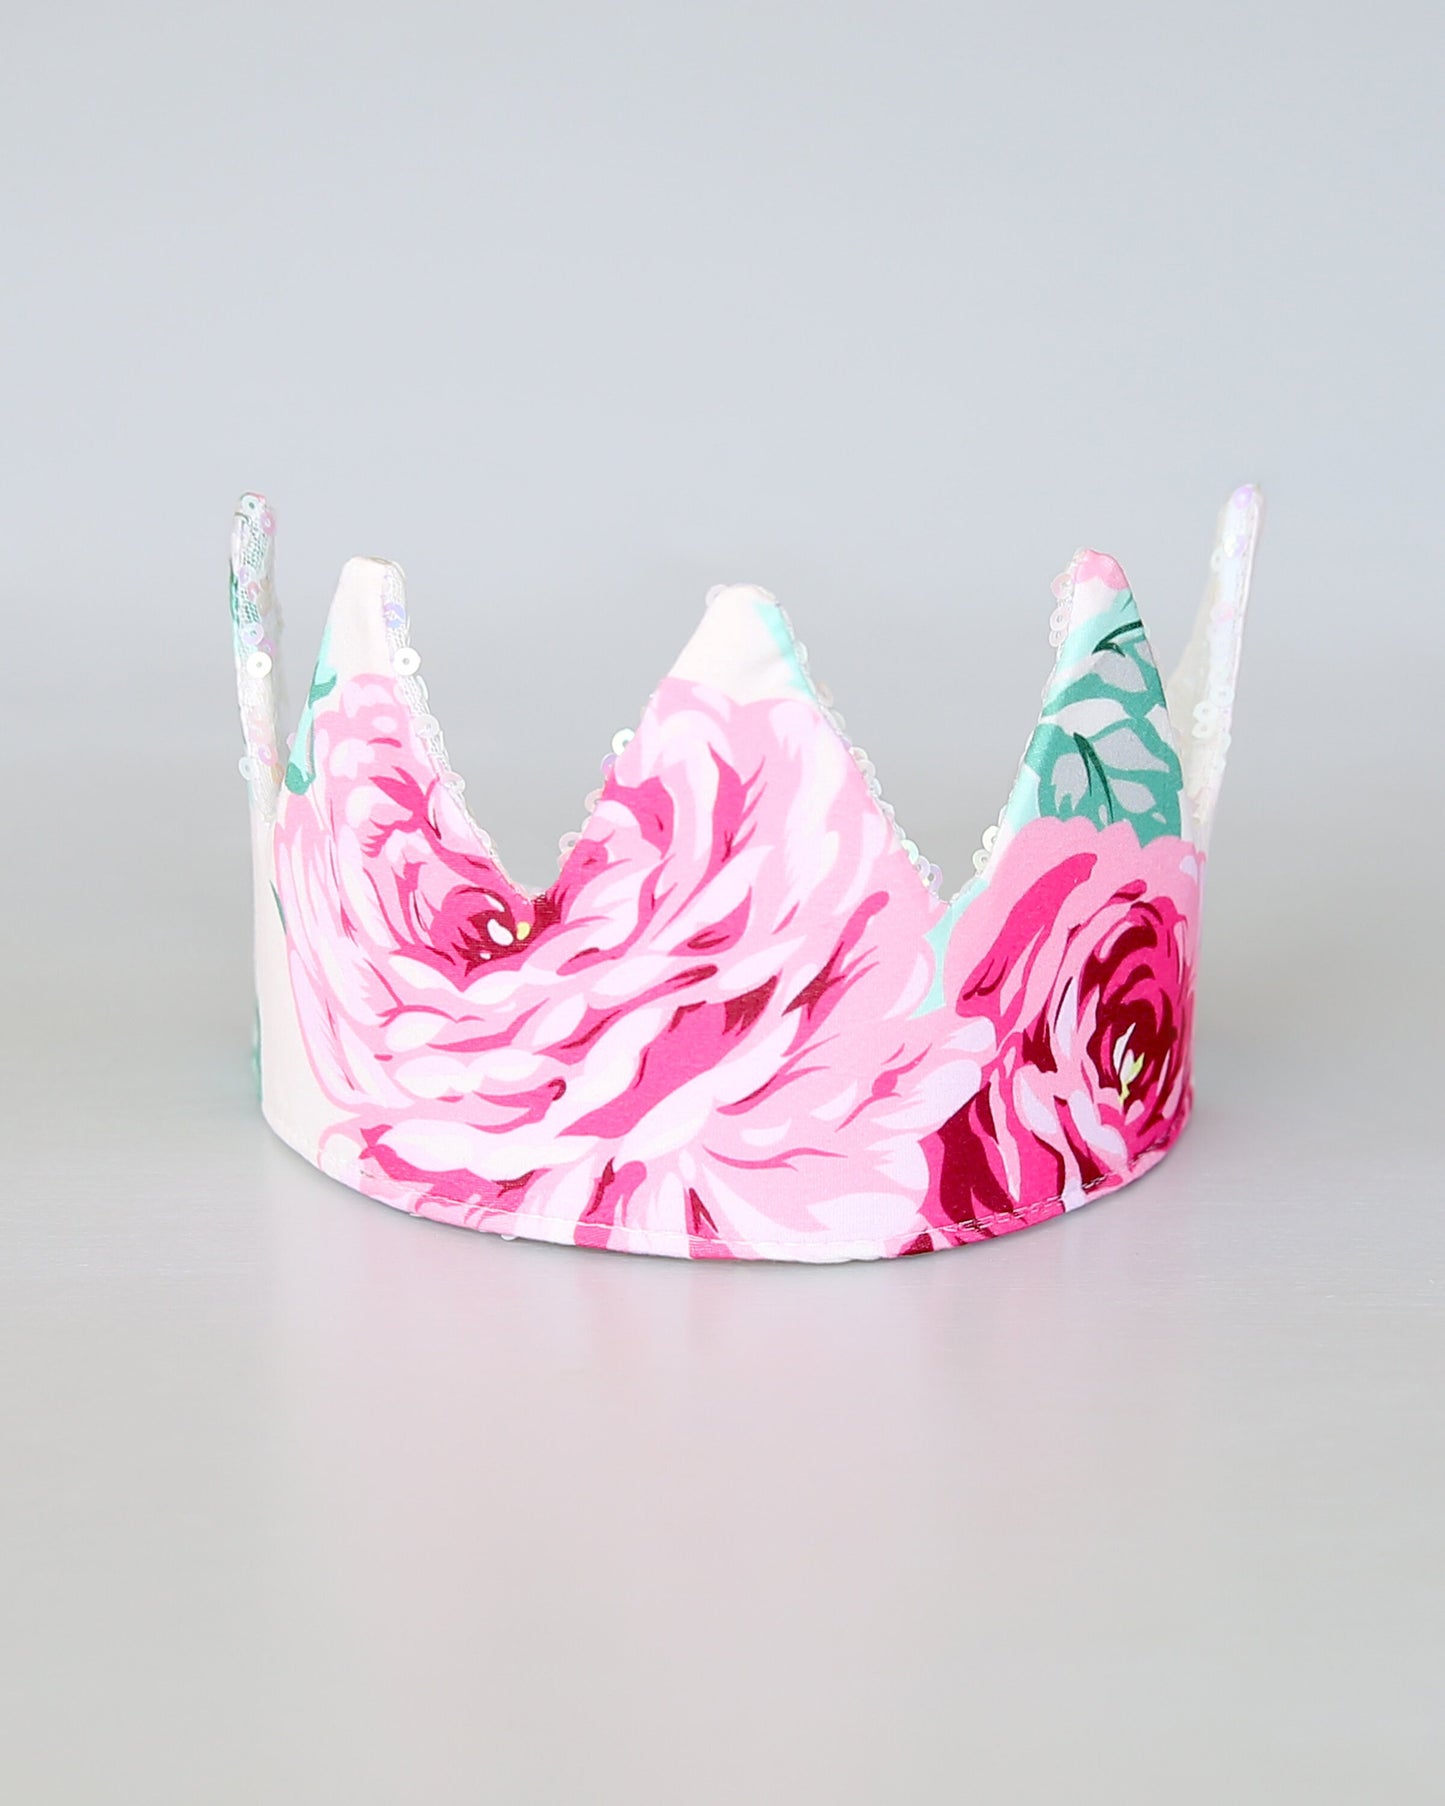 Dress Up Crown - Sequin Crown - Birthday Crown - Roses Sequin Crown REVERSE to White Sequins - Fits all